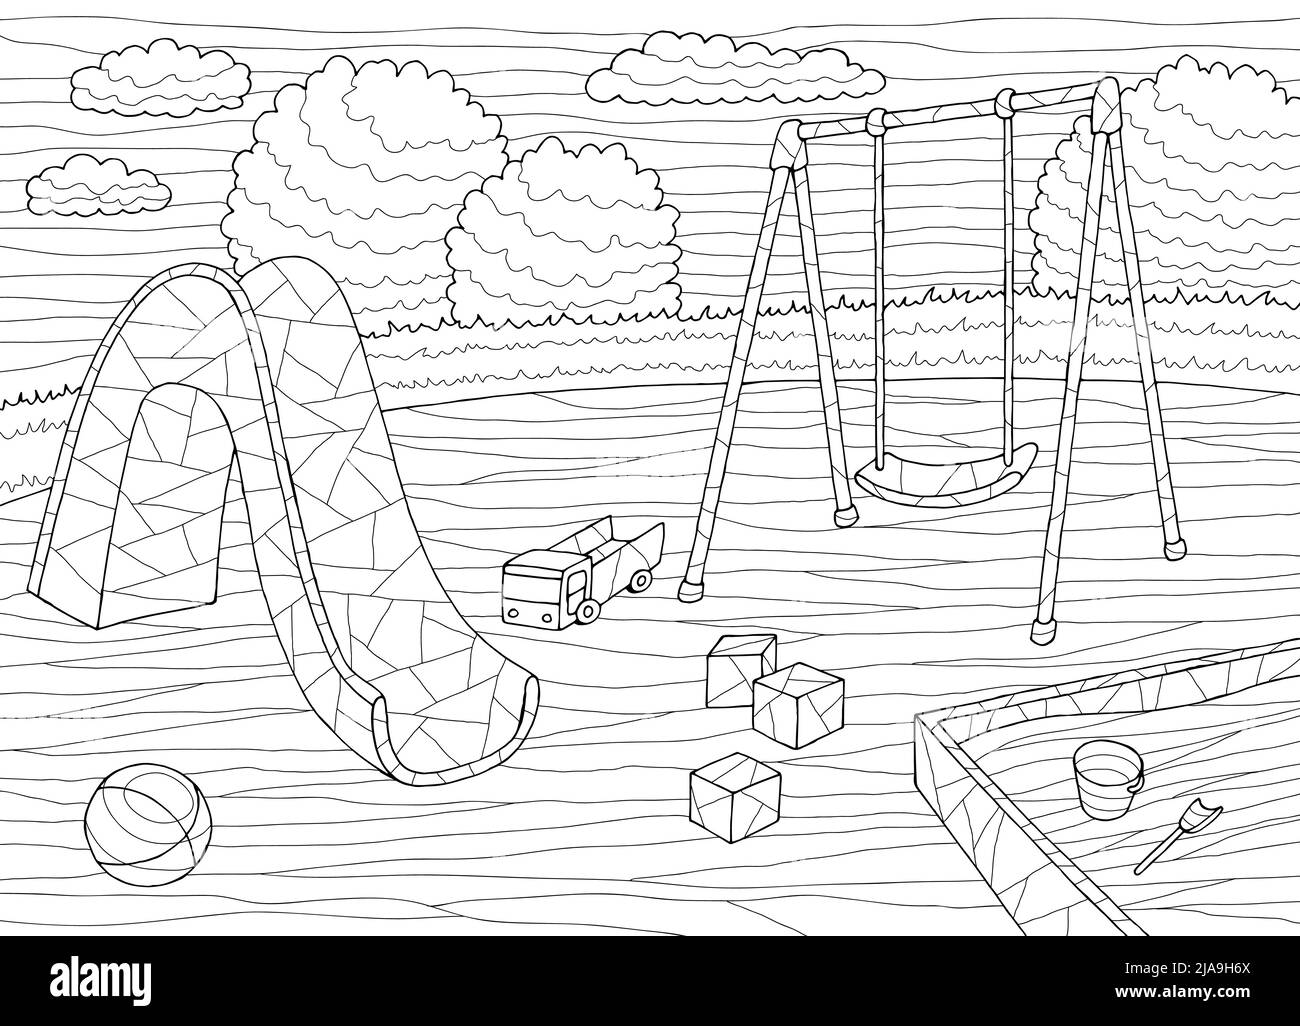 Playground coloring graphic black white landscape sketch illustration vector Stock Vector